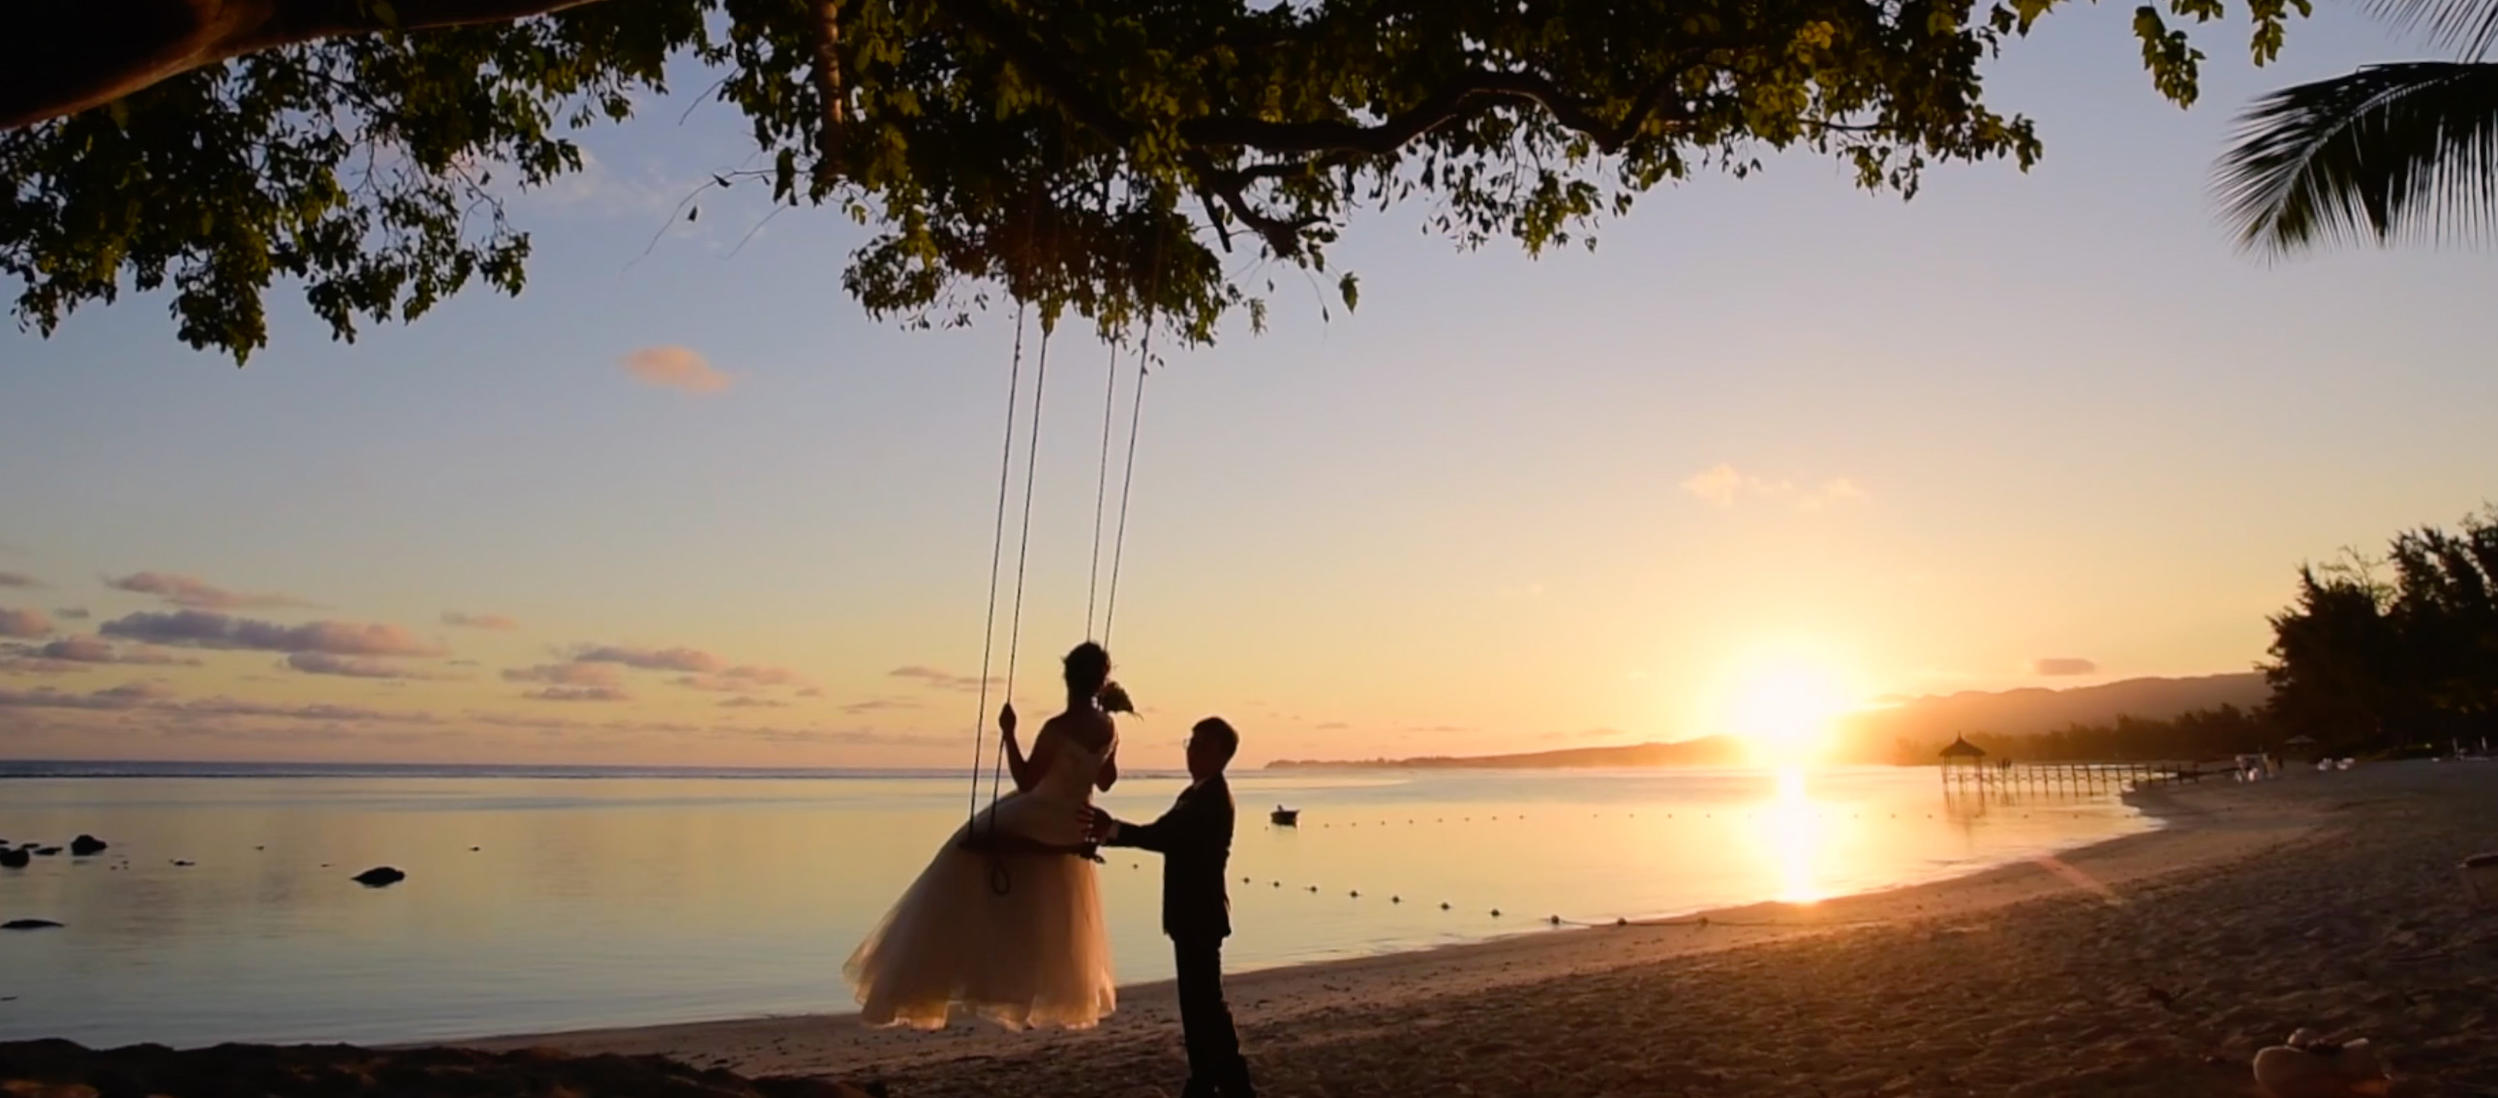 Book your wedding day in Shanti Maurice Resort & Spa